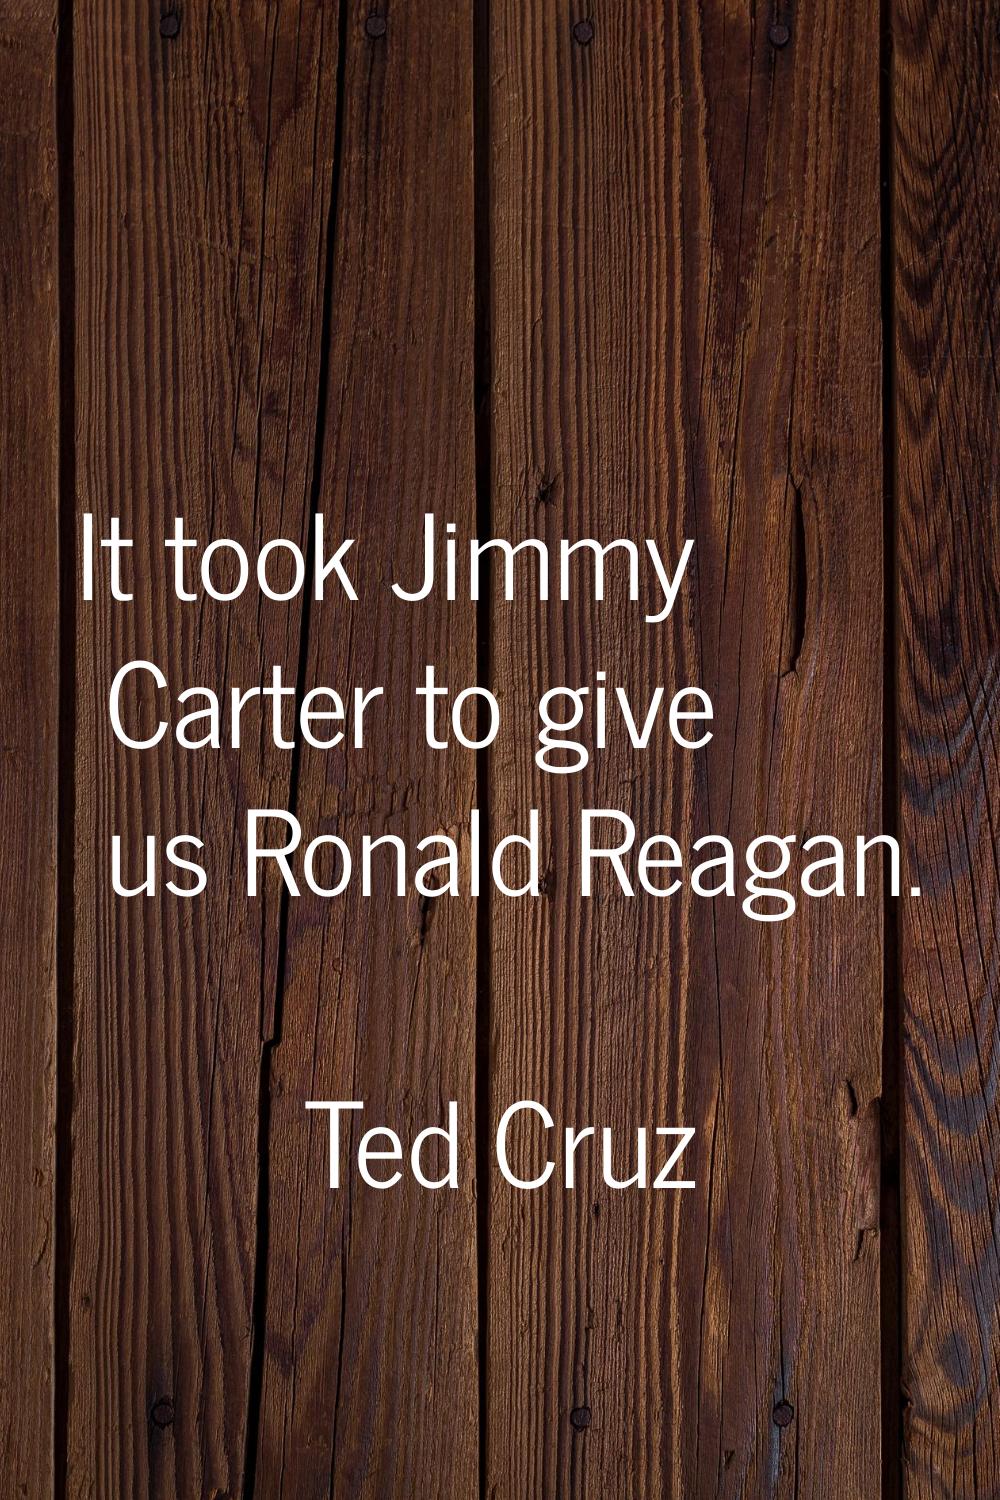 It took Jimmy Carter to give us Ronald Reagan.